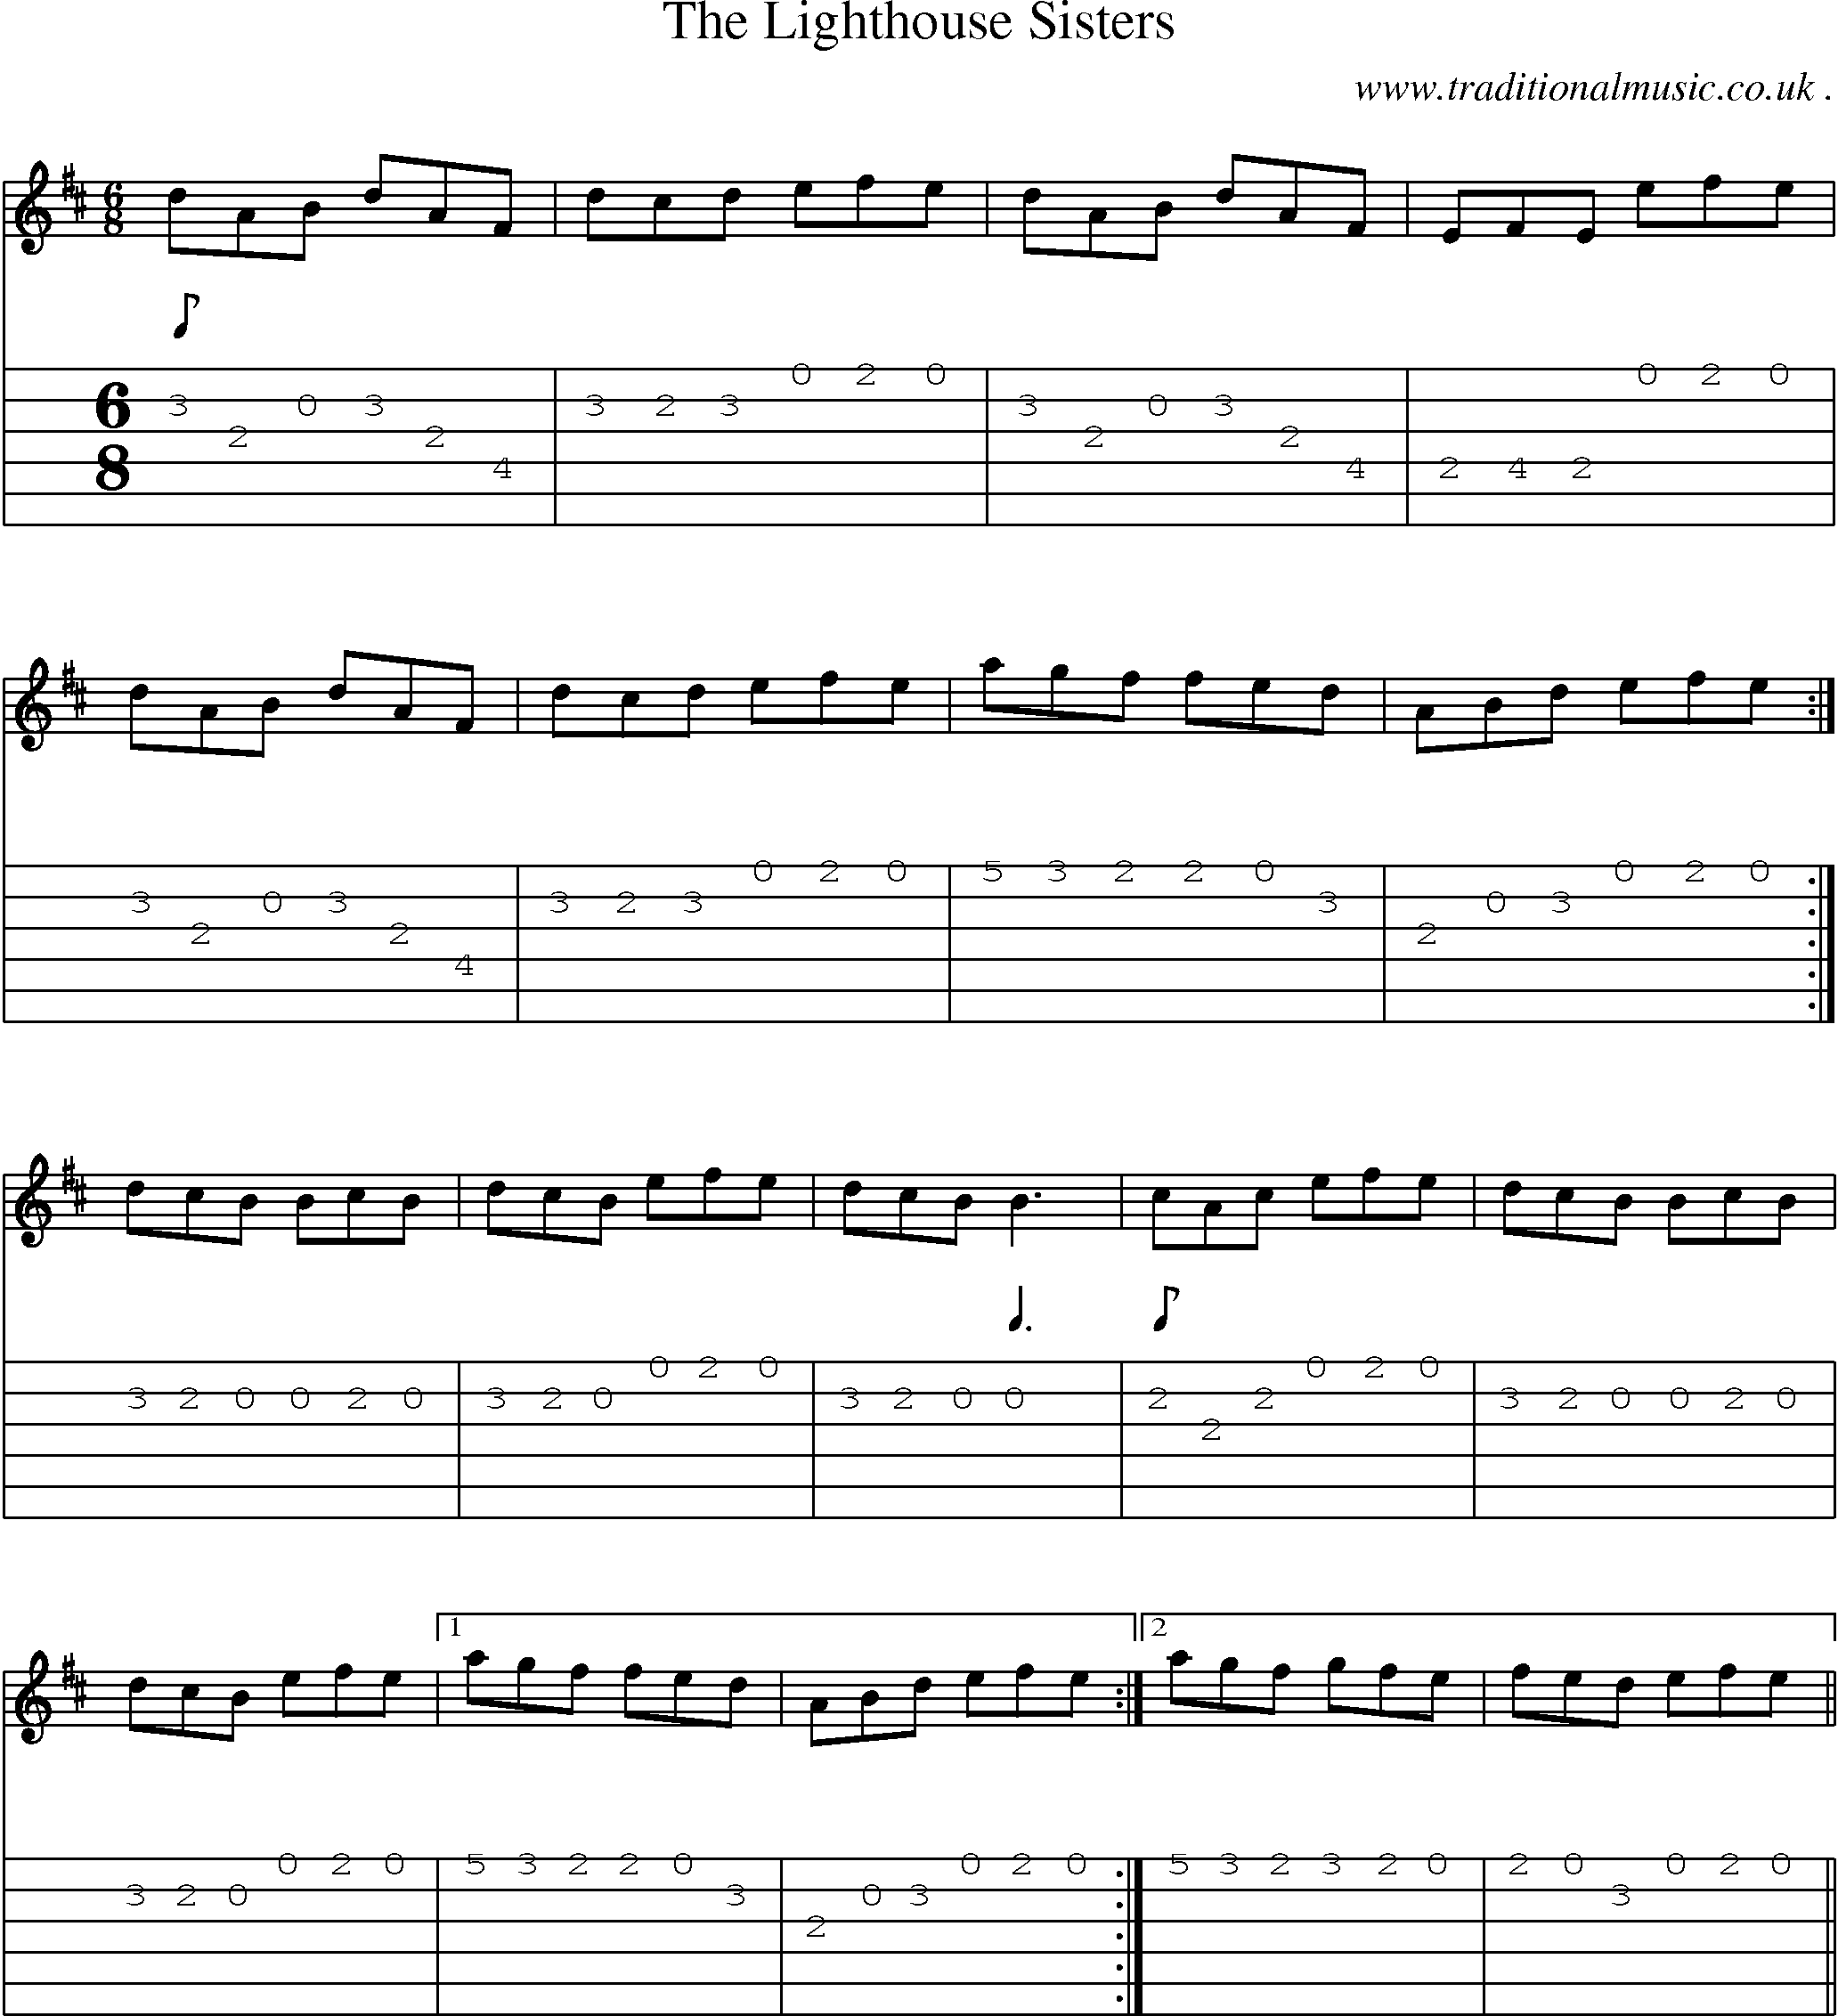 Sheet-Music and Guitar Tabs for The Lighthouse Sisters